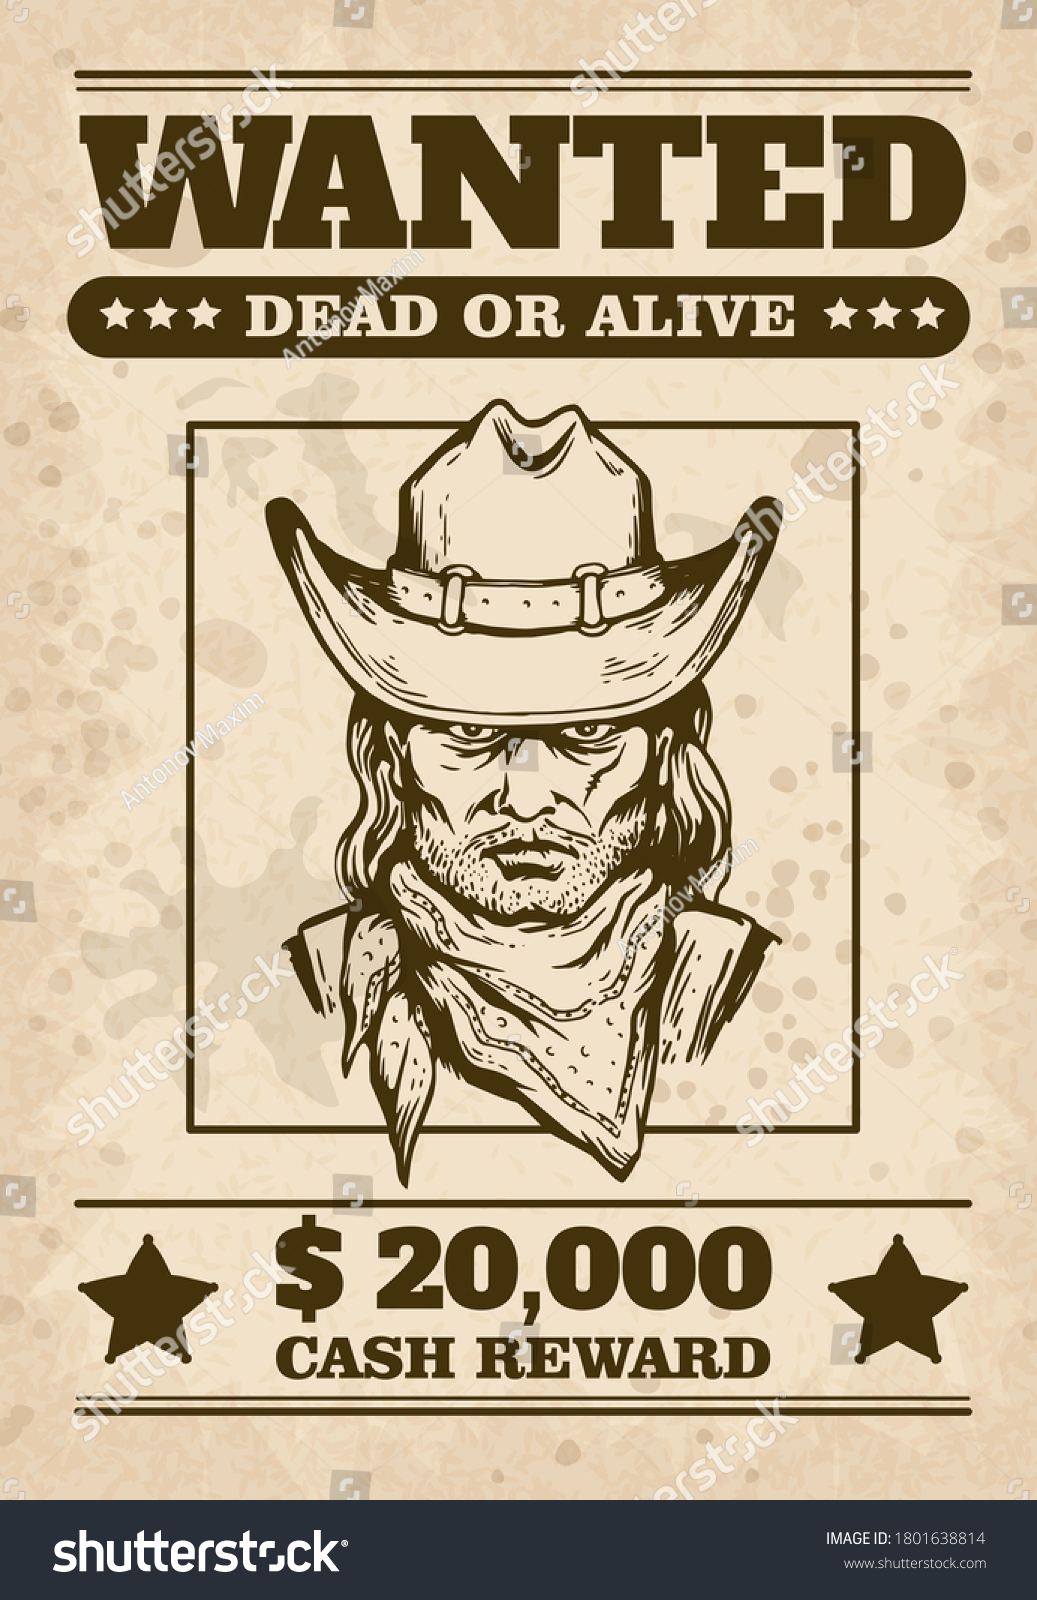 Wild west wanted poster design with cowboys face, sketch cartoon vector illustration. Vintage sheriff poster with grunge effect for the search for criminals. #1801638814